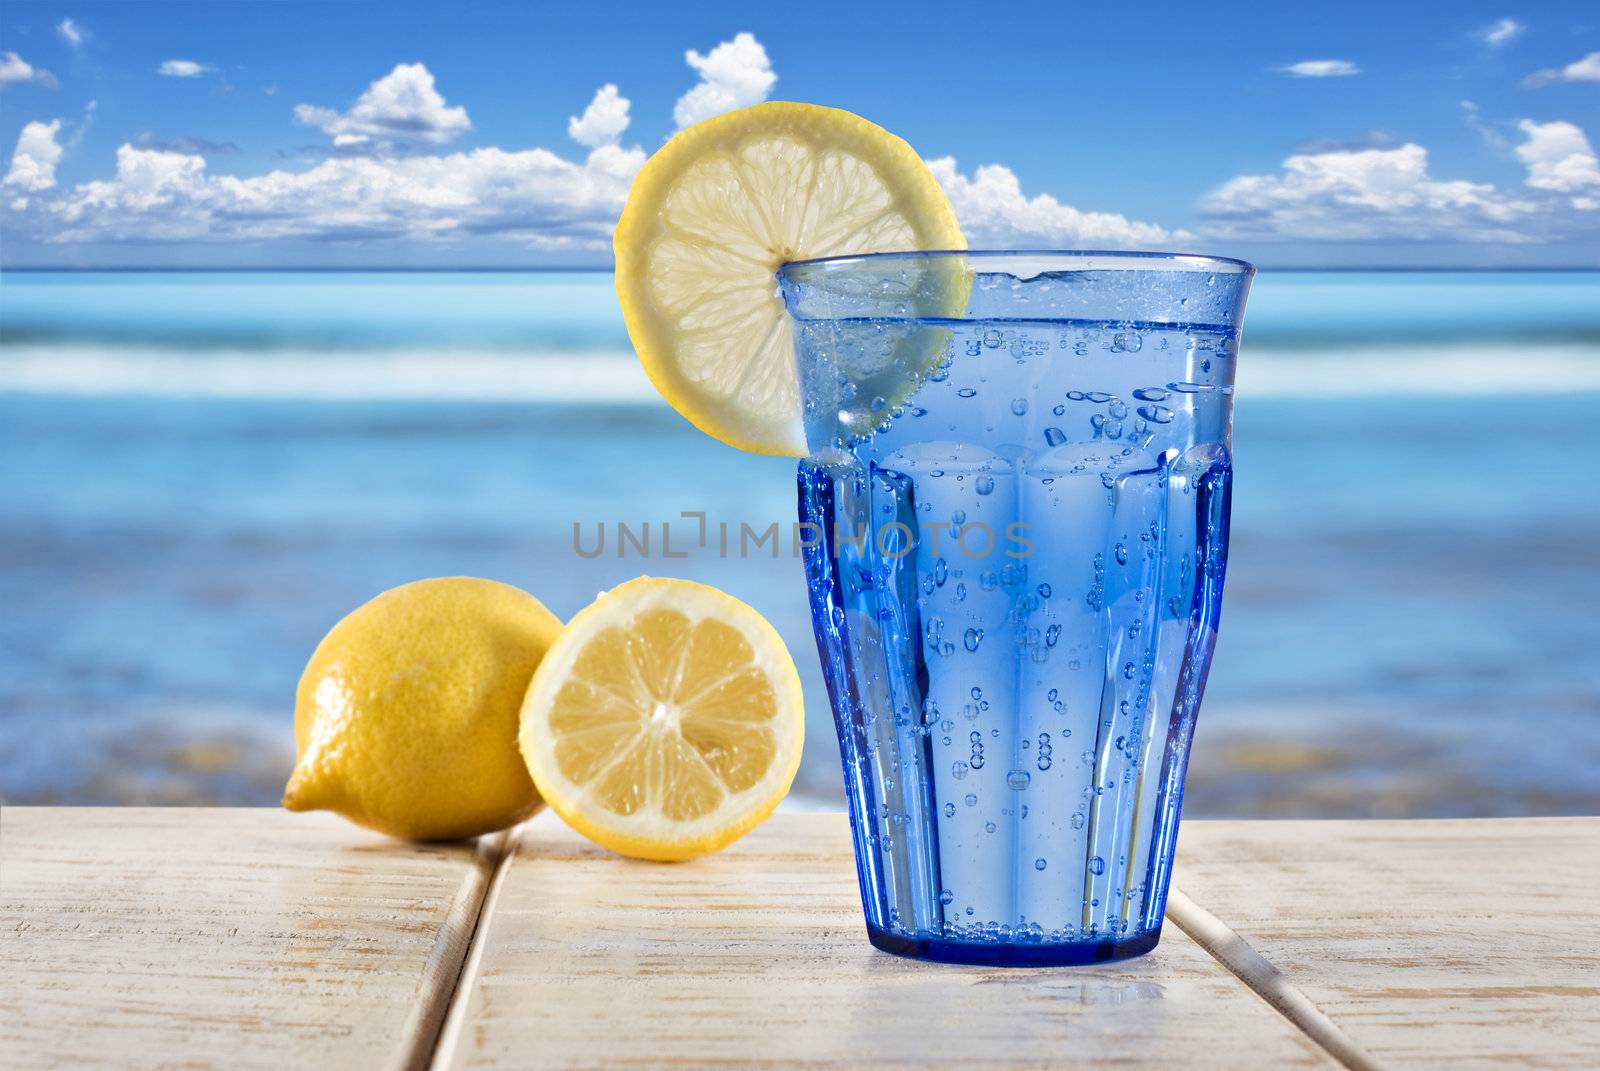 a Blue glass with sparkling water and lemon on a wooden deck overlooking a tropical beach